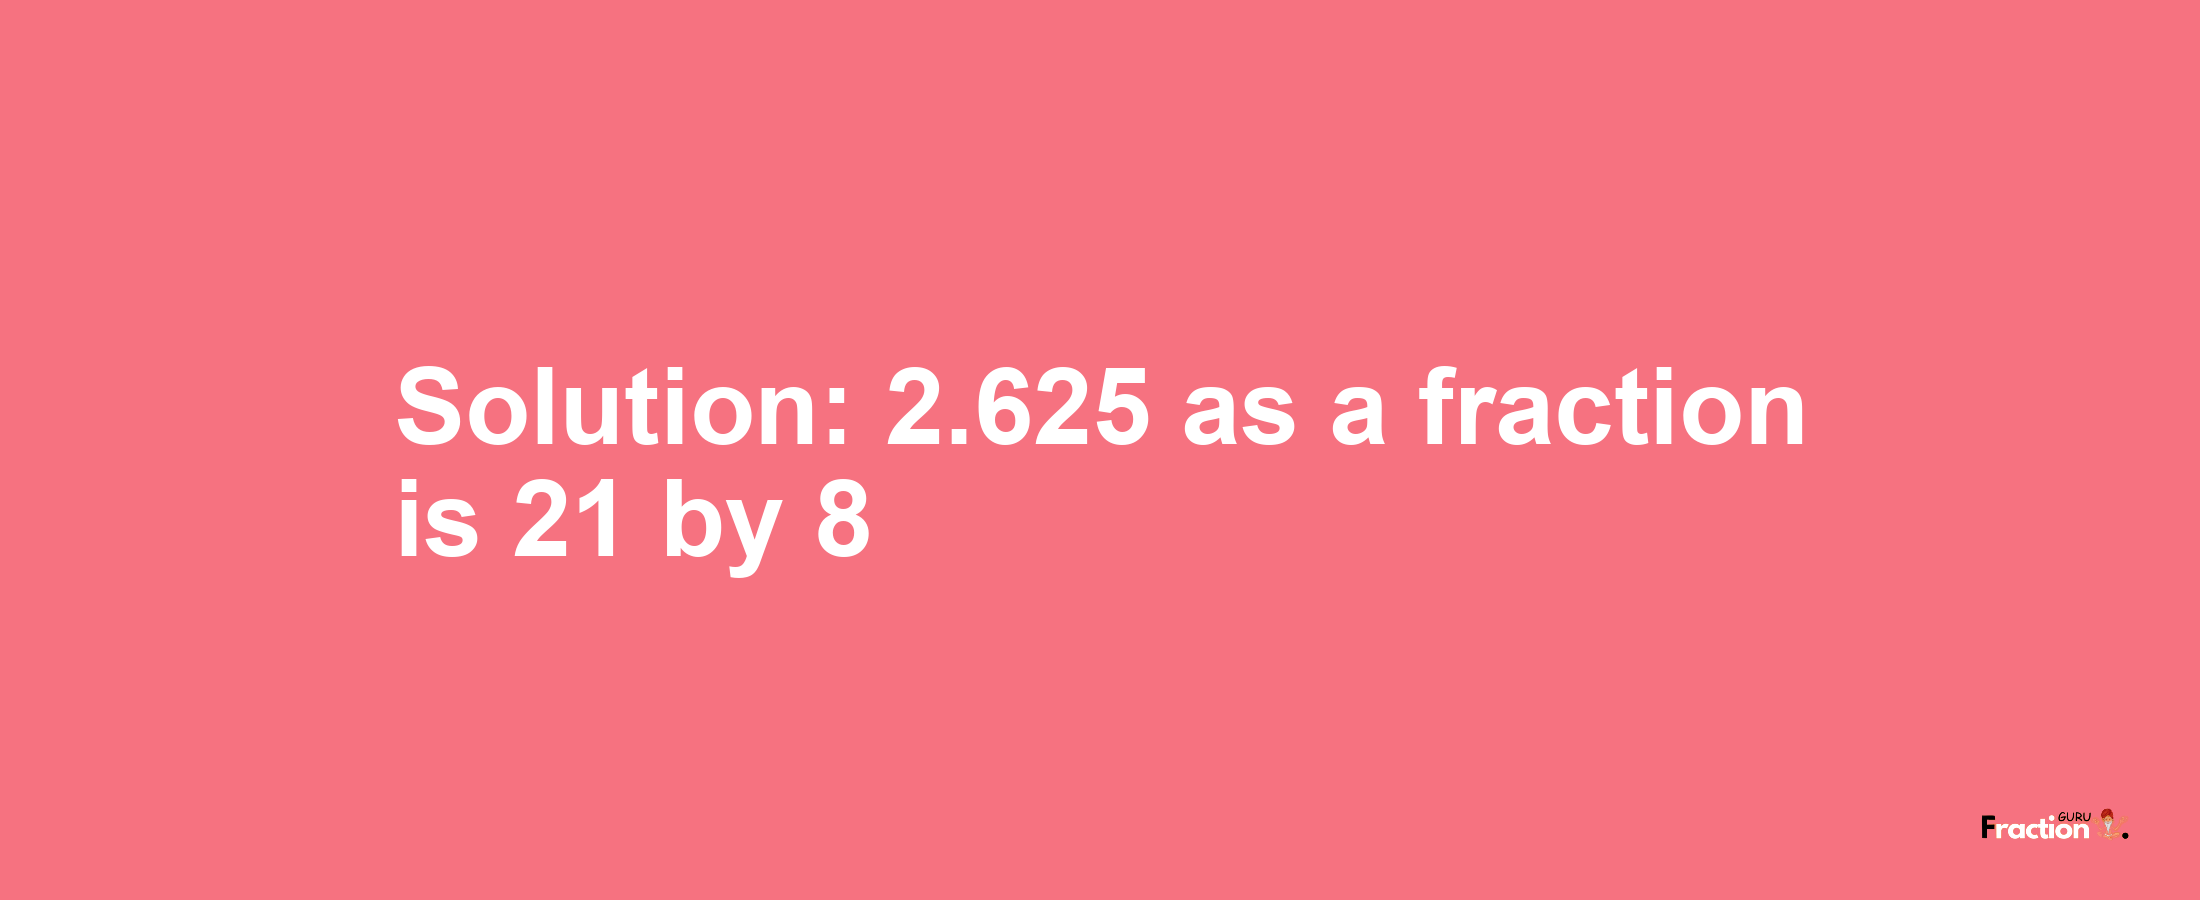 Solution:2.625 as a fraction is 21/8